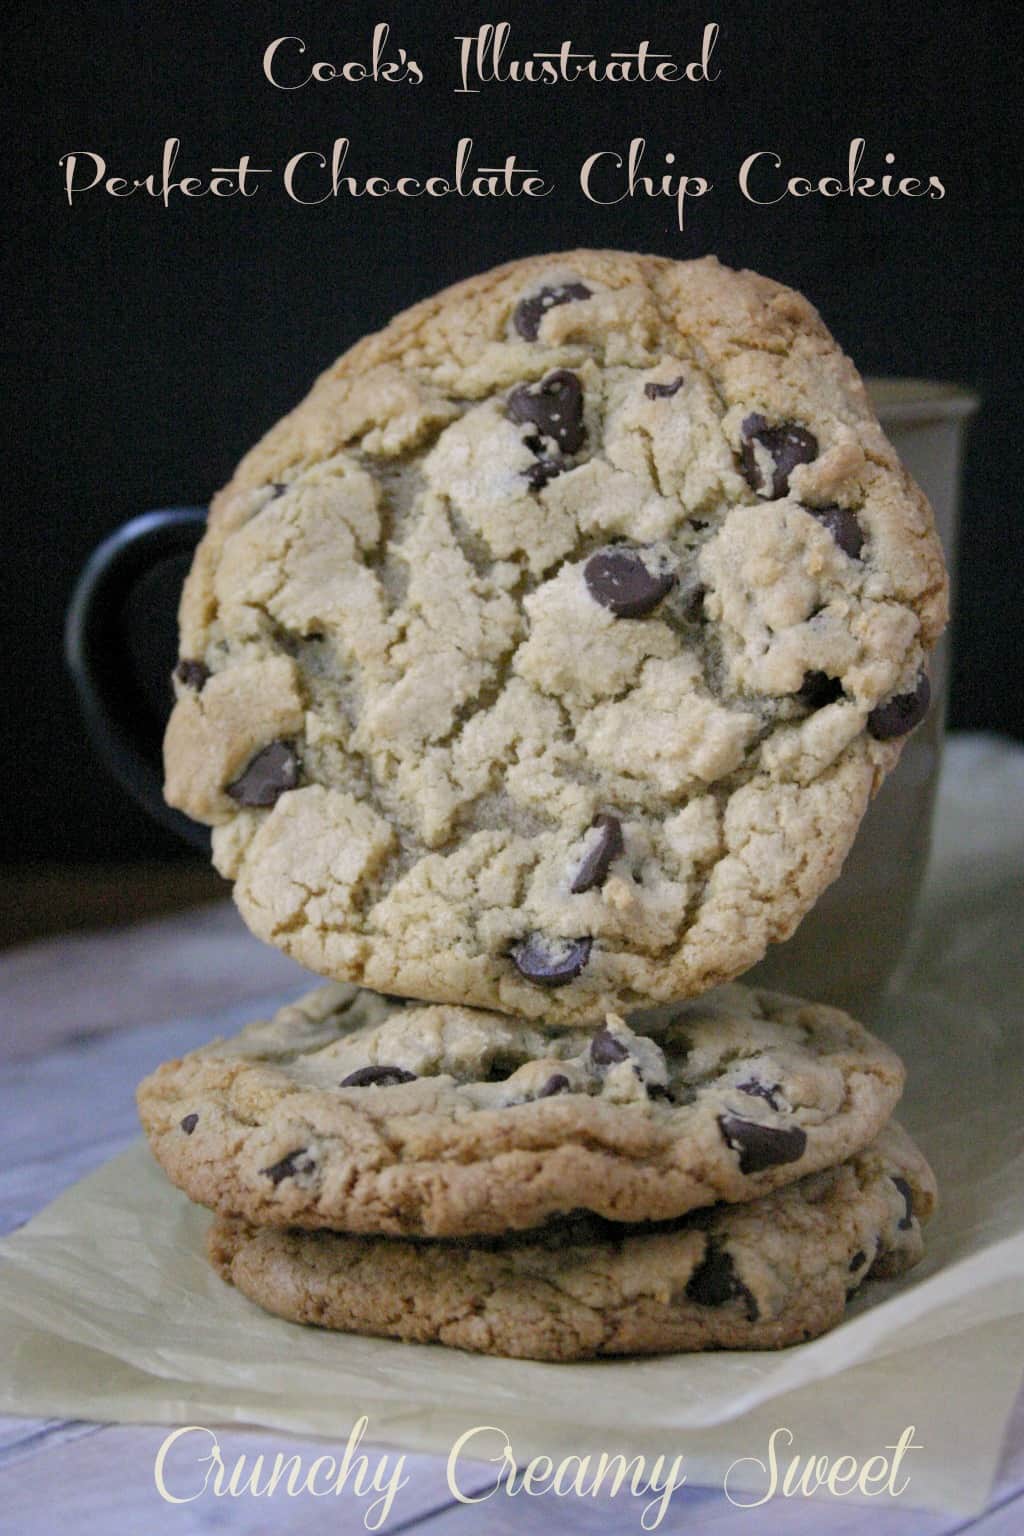 Side shot of chocolate chip cookies stacked on each other, one leaning over a cup.